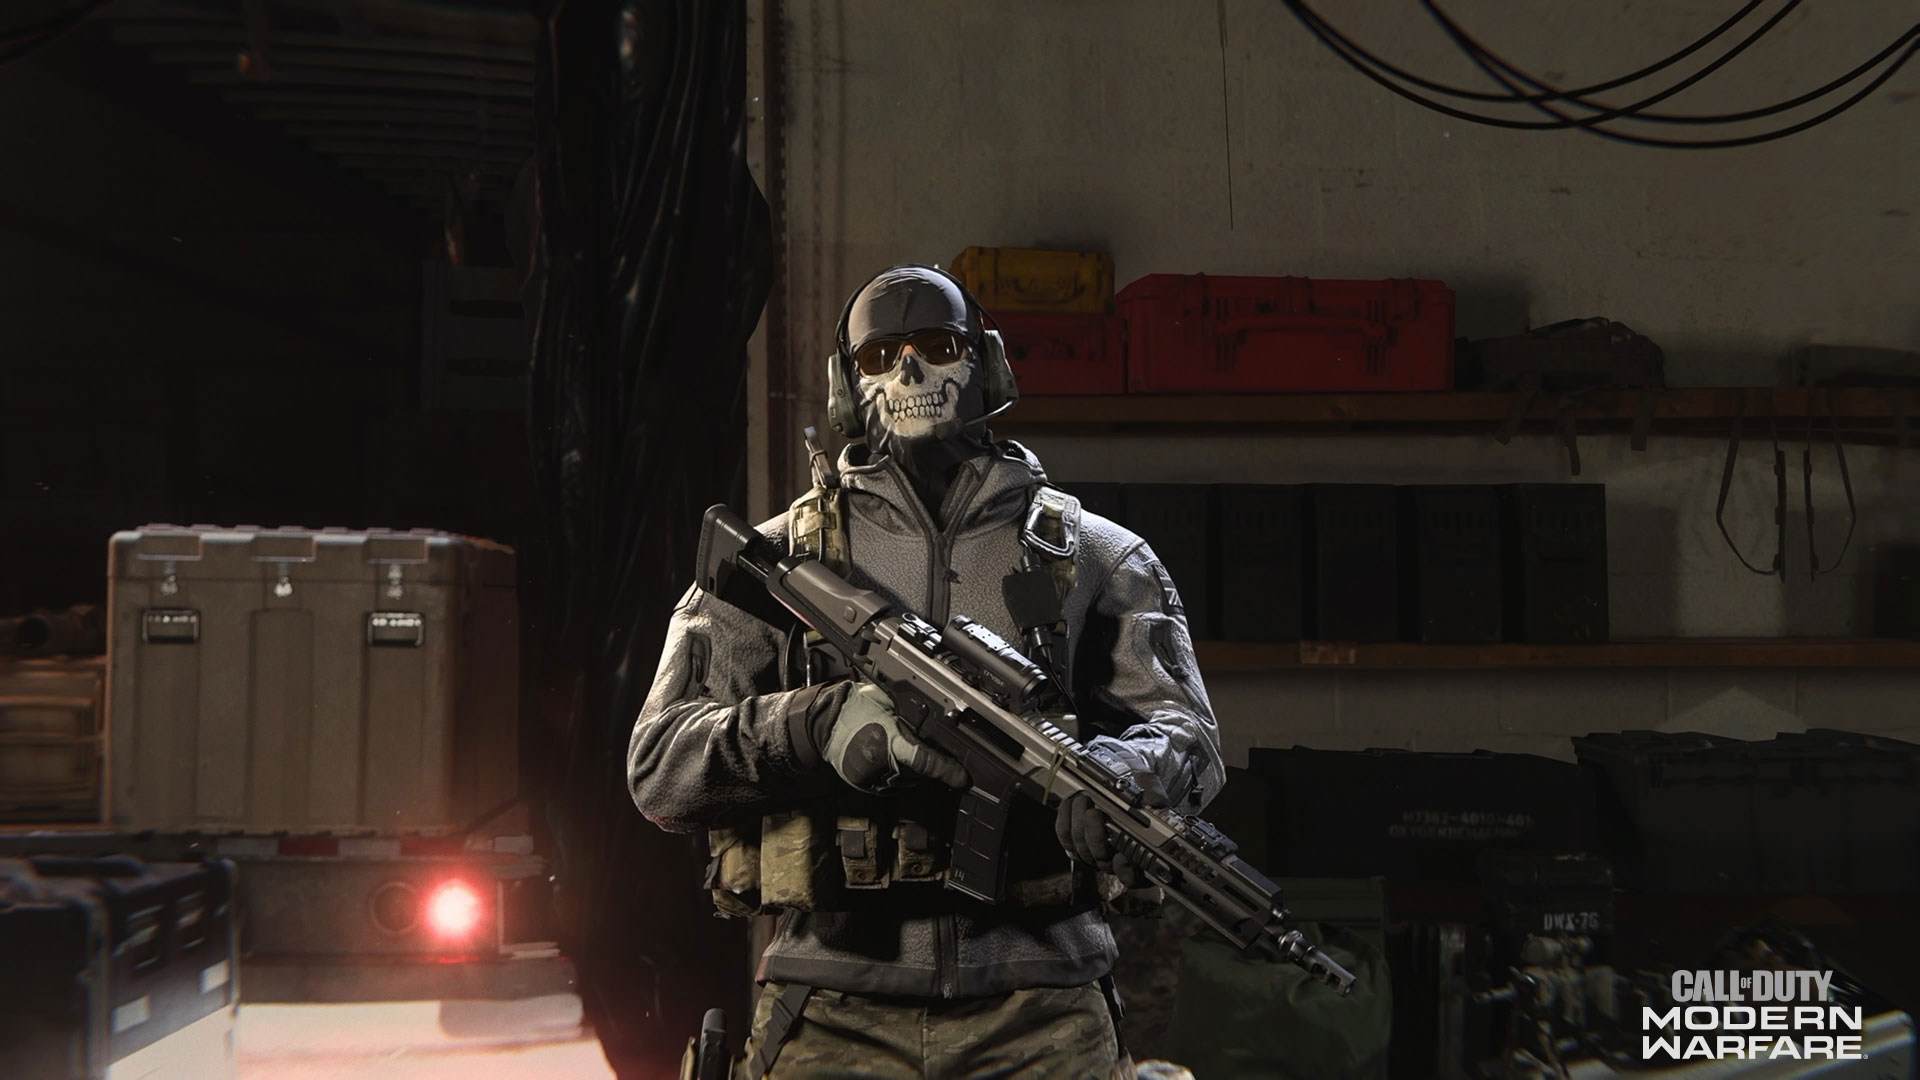 The Ghost Pack Contingency Bundle features iconic items for the SAS